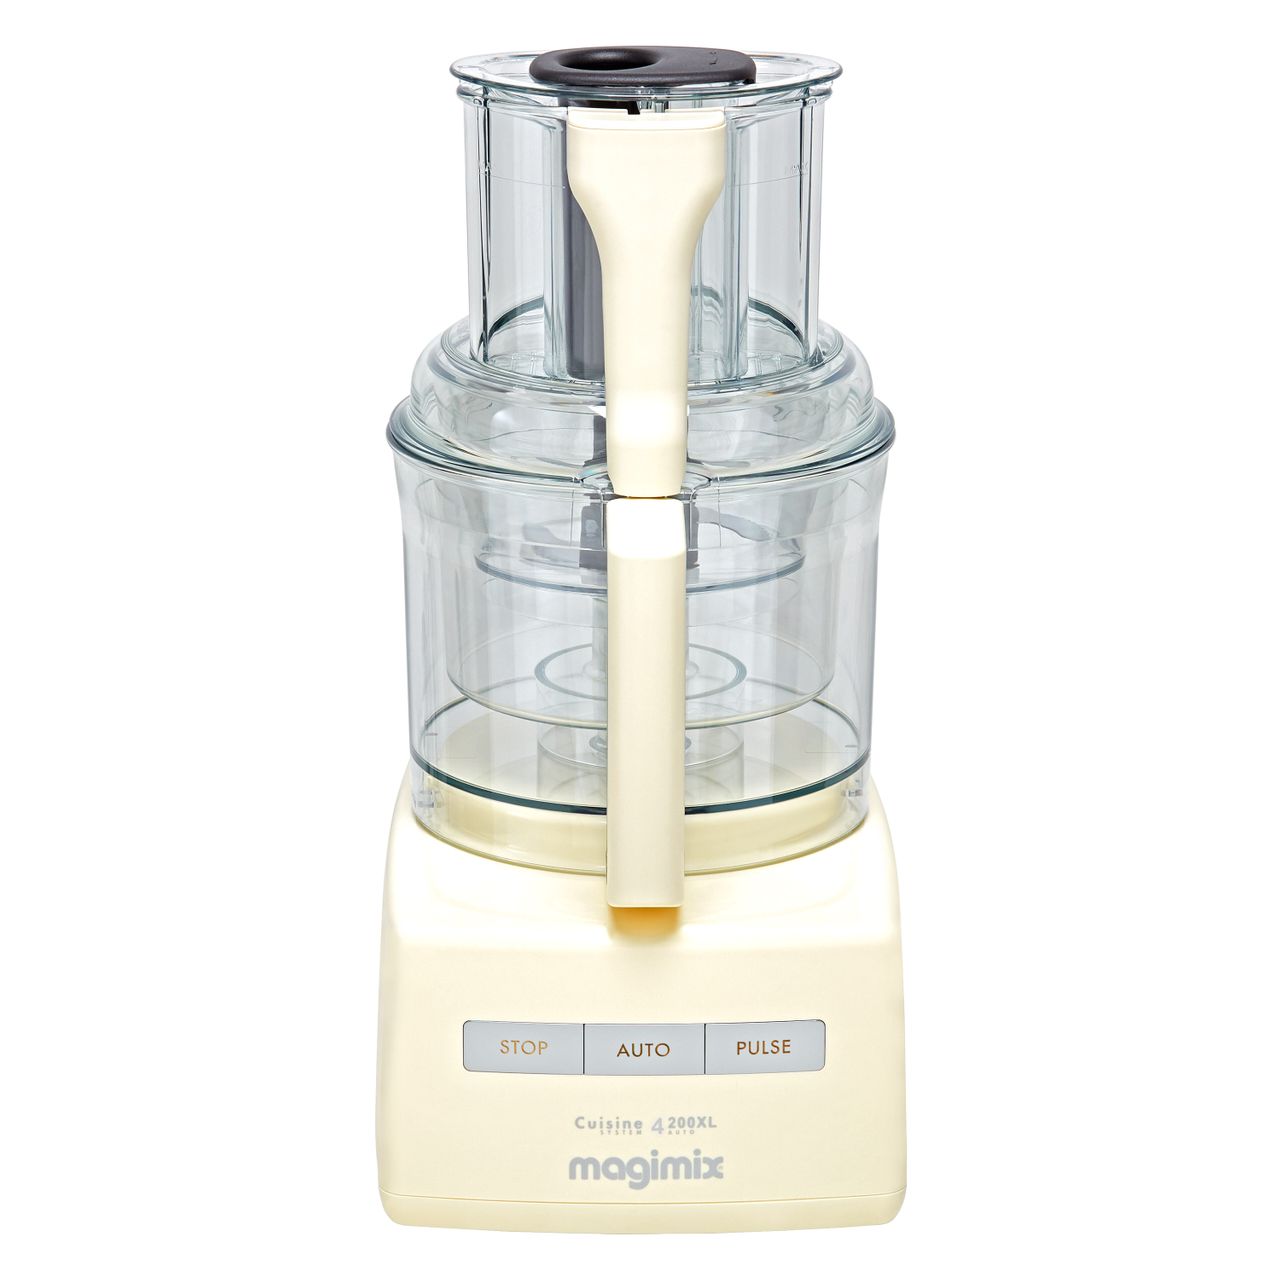 Magimix 4200XL 18475 3 Litre Food Processor With 11 Accessories Review